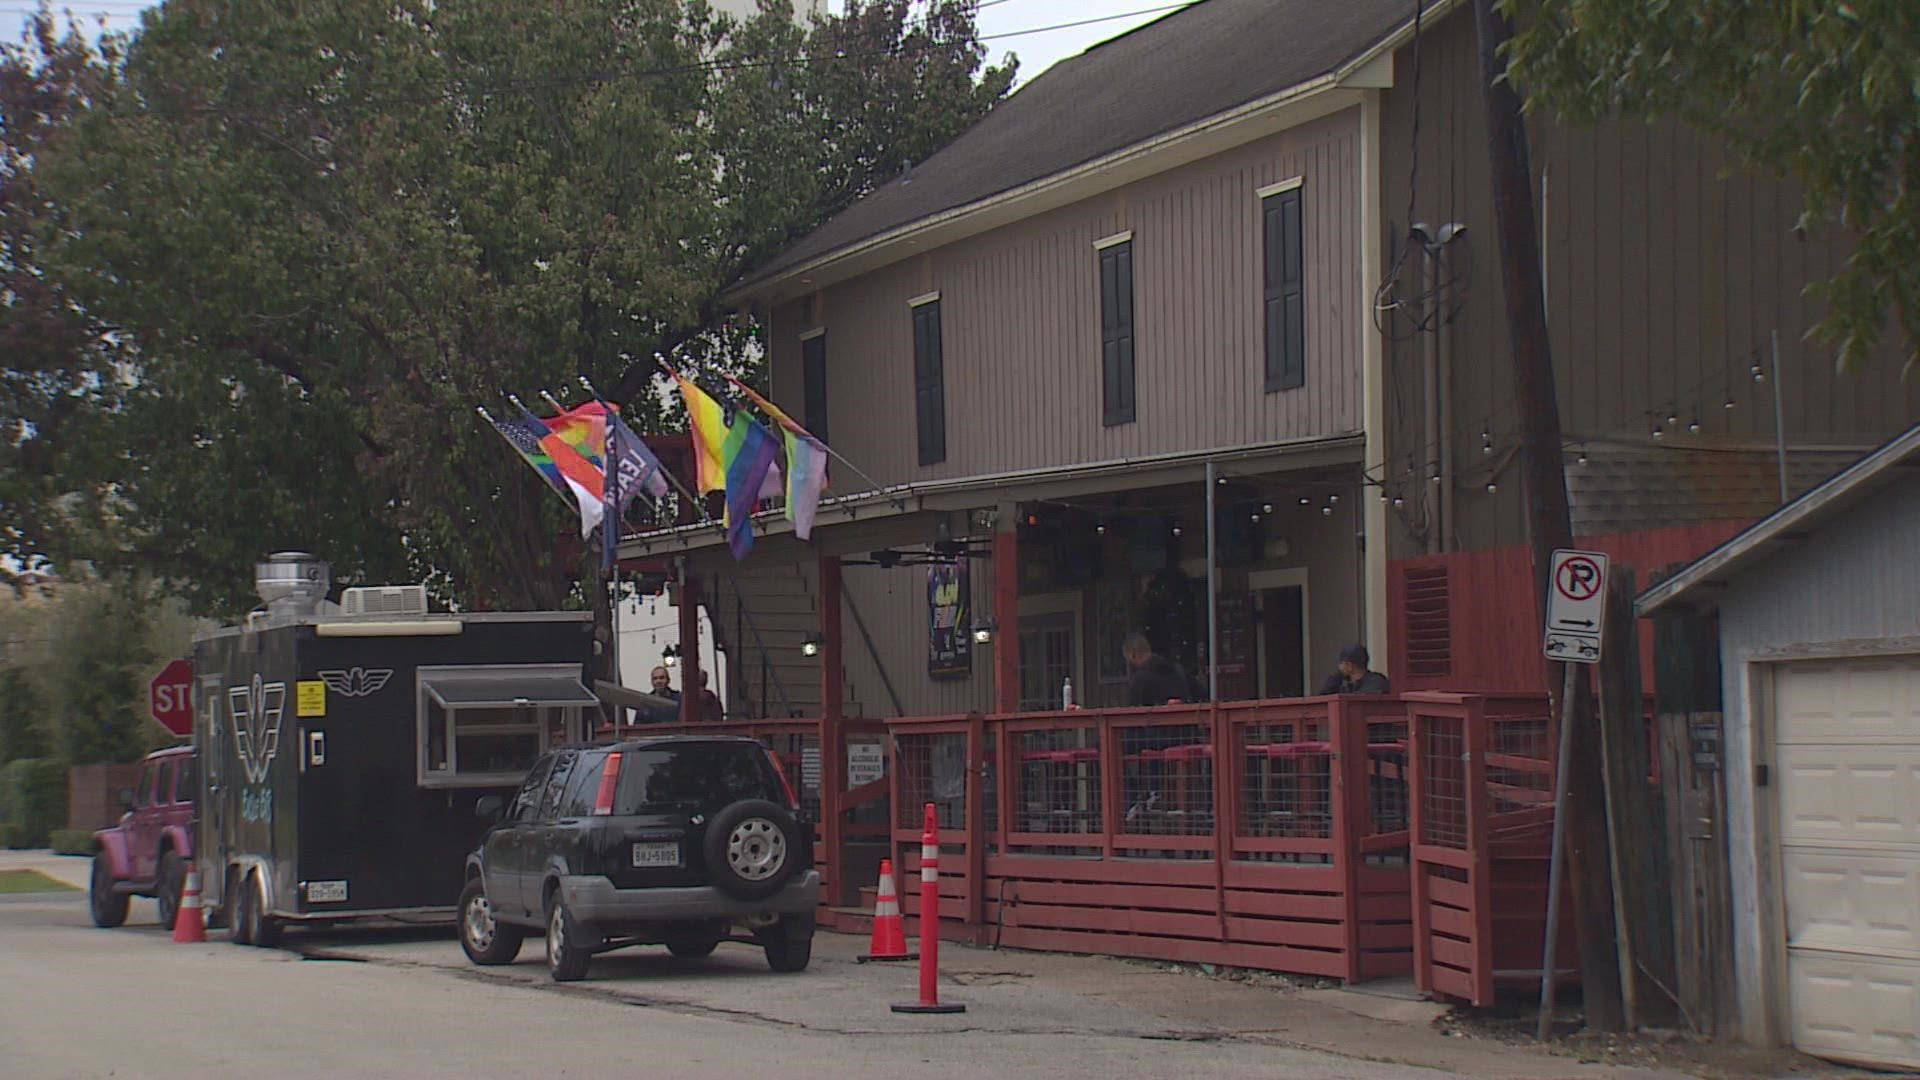 At least one popular LGBTQ club in Houston is changing its security protocol.